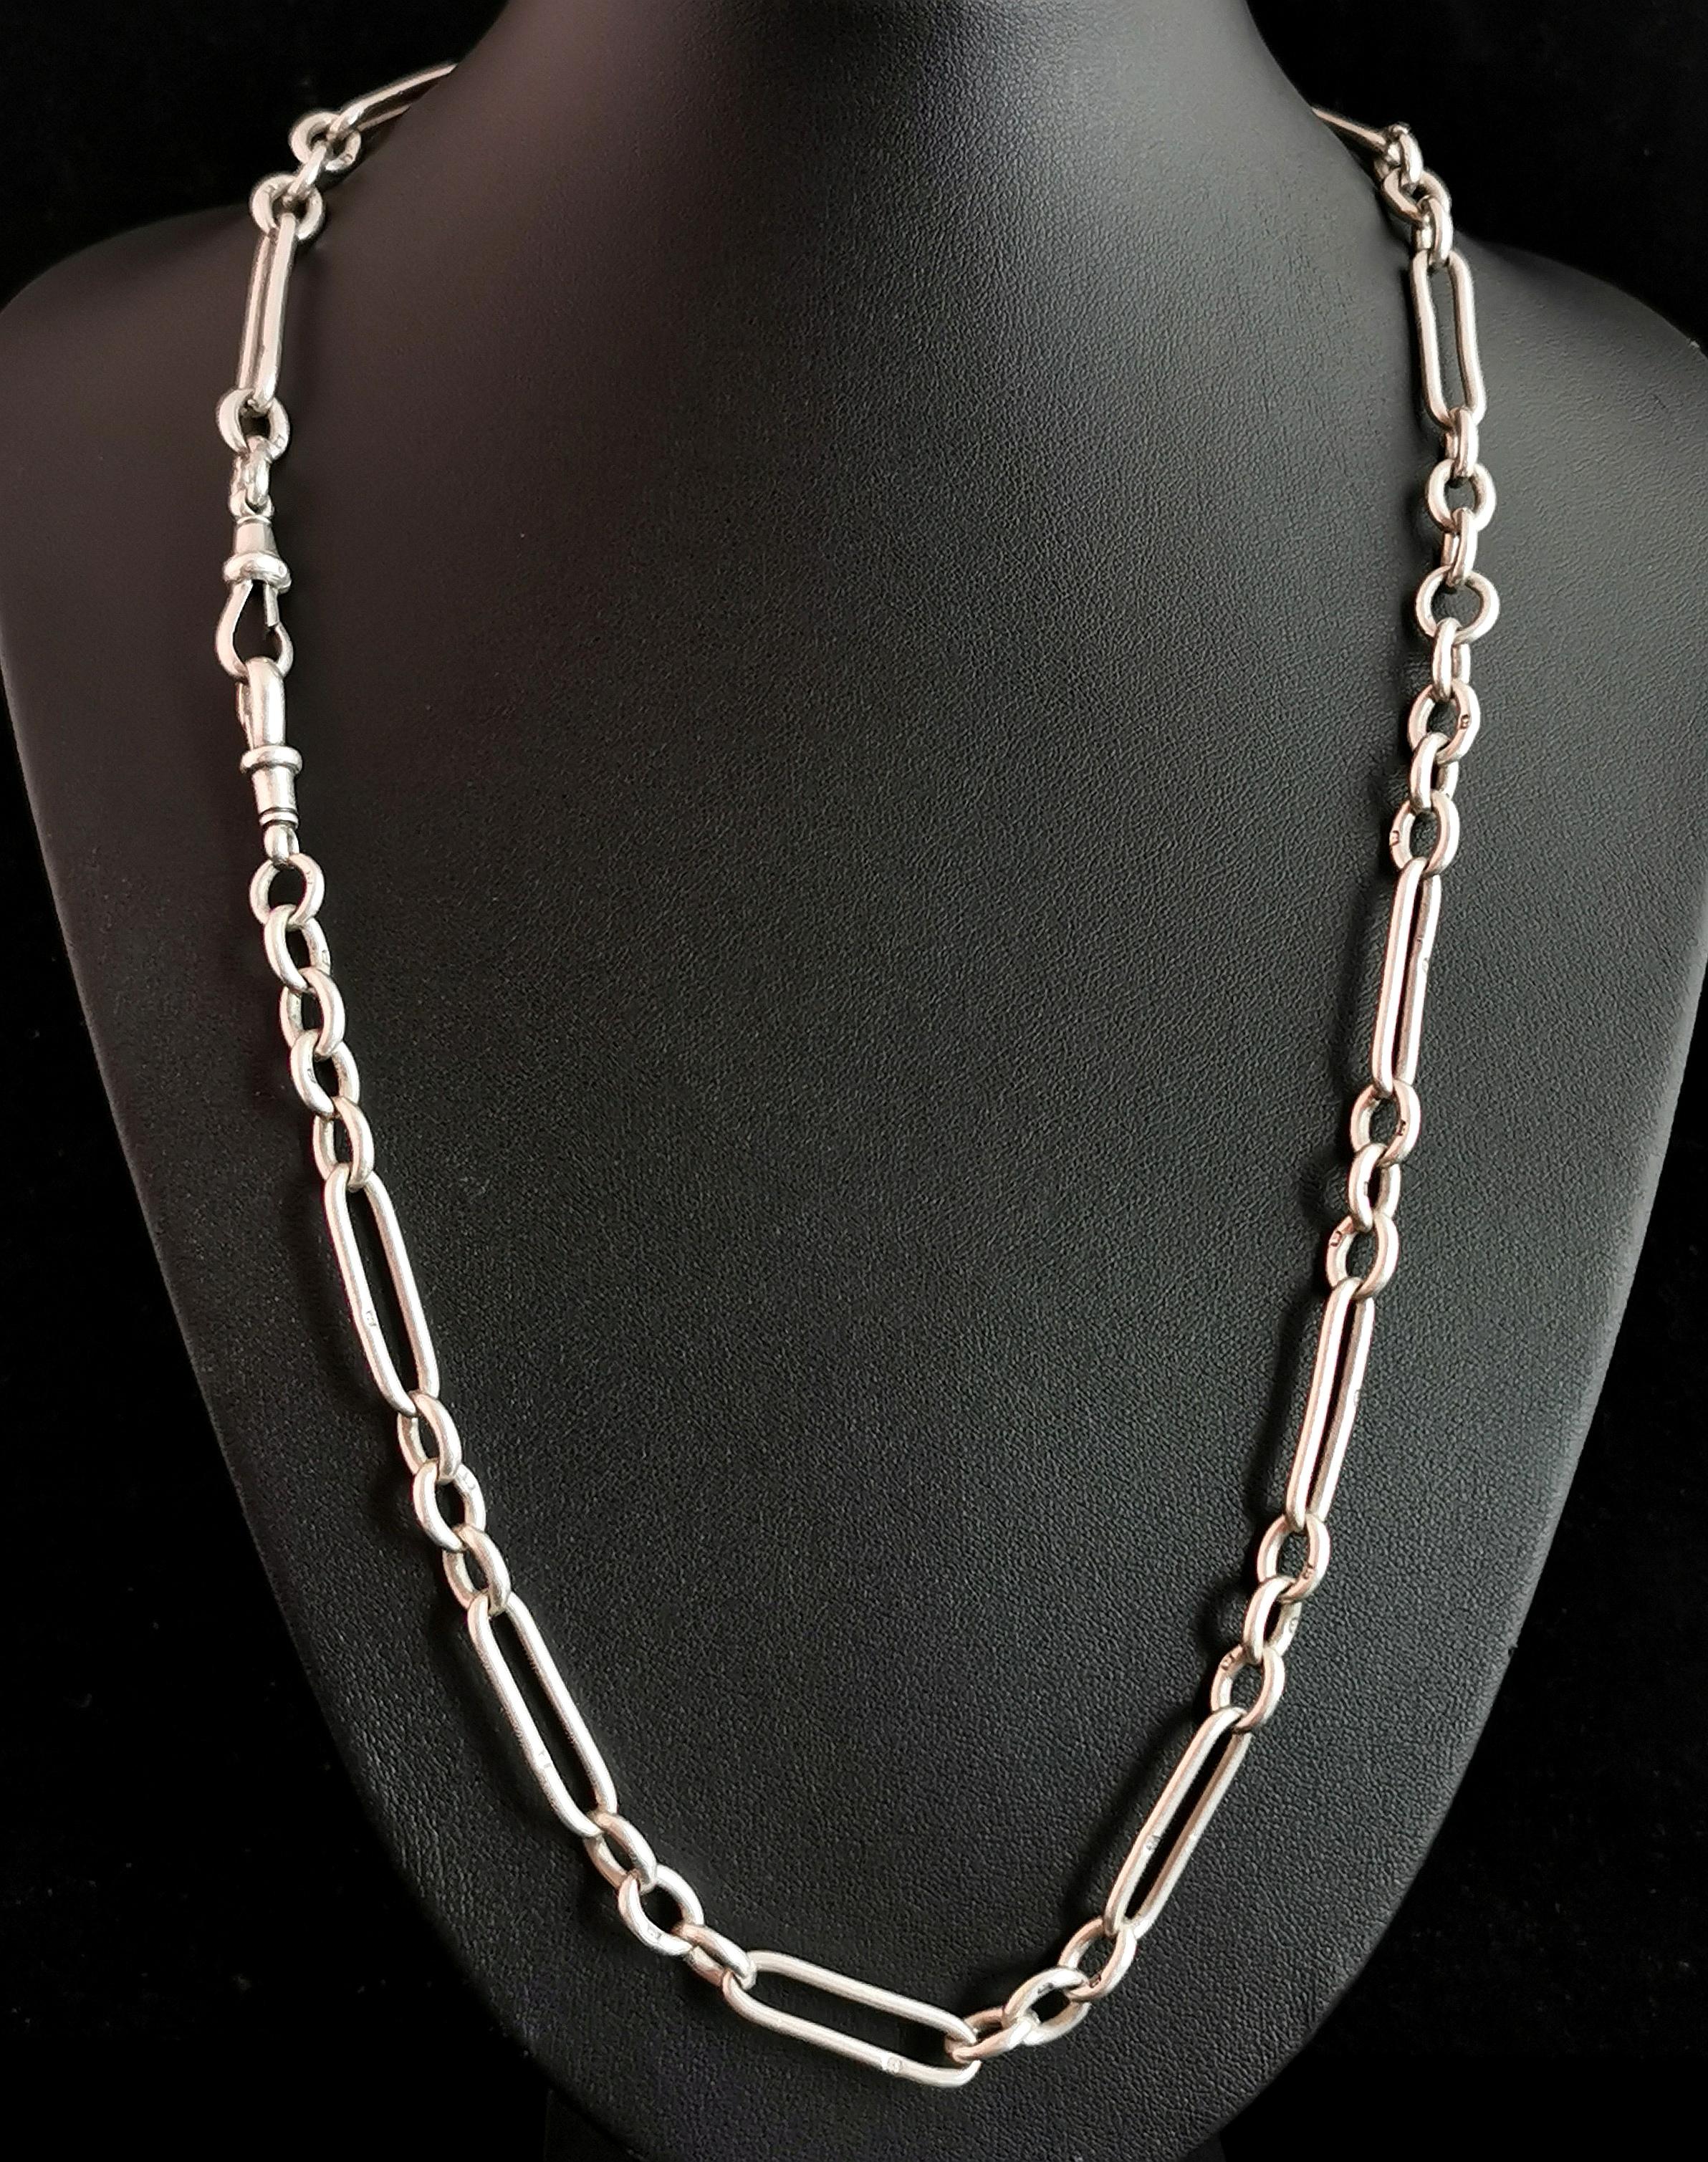 An amazing antique, Victorian era sterling silver Albert chain or watch chain.

A rare antique chain with a long length, can be worn as a nice chunky chain necklace or doubled over for your pocket watch.

The chain is made from sterling silver and